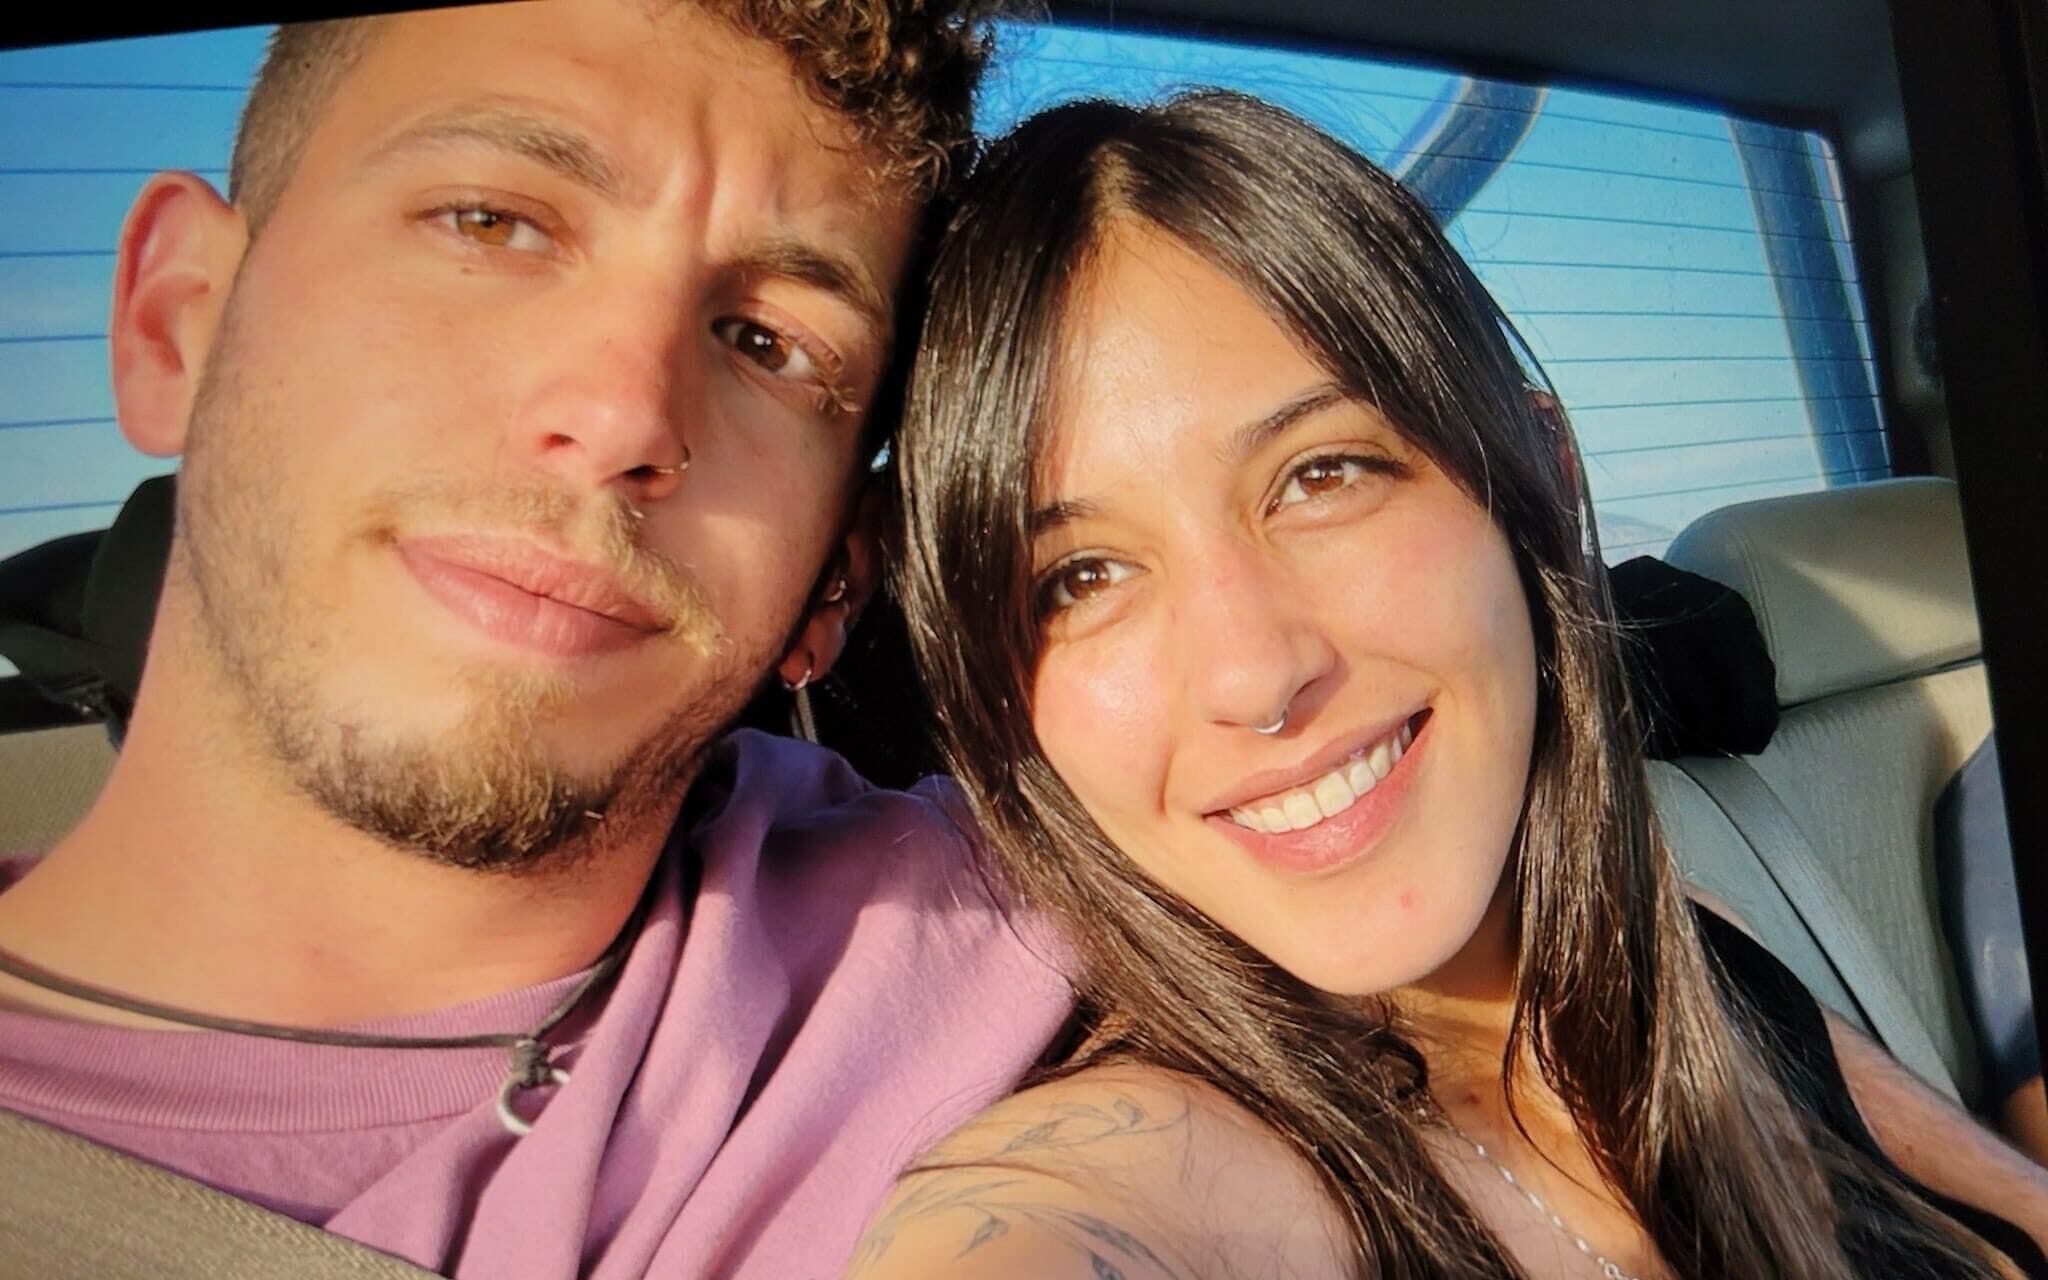 Gideon and Noa Chiell, 24 & 27: Siblings with matching tattoos